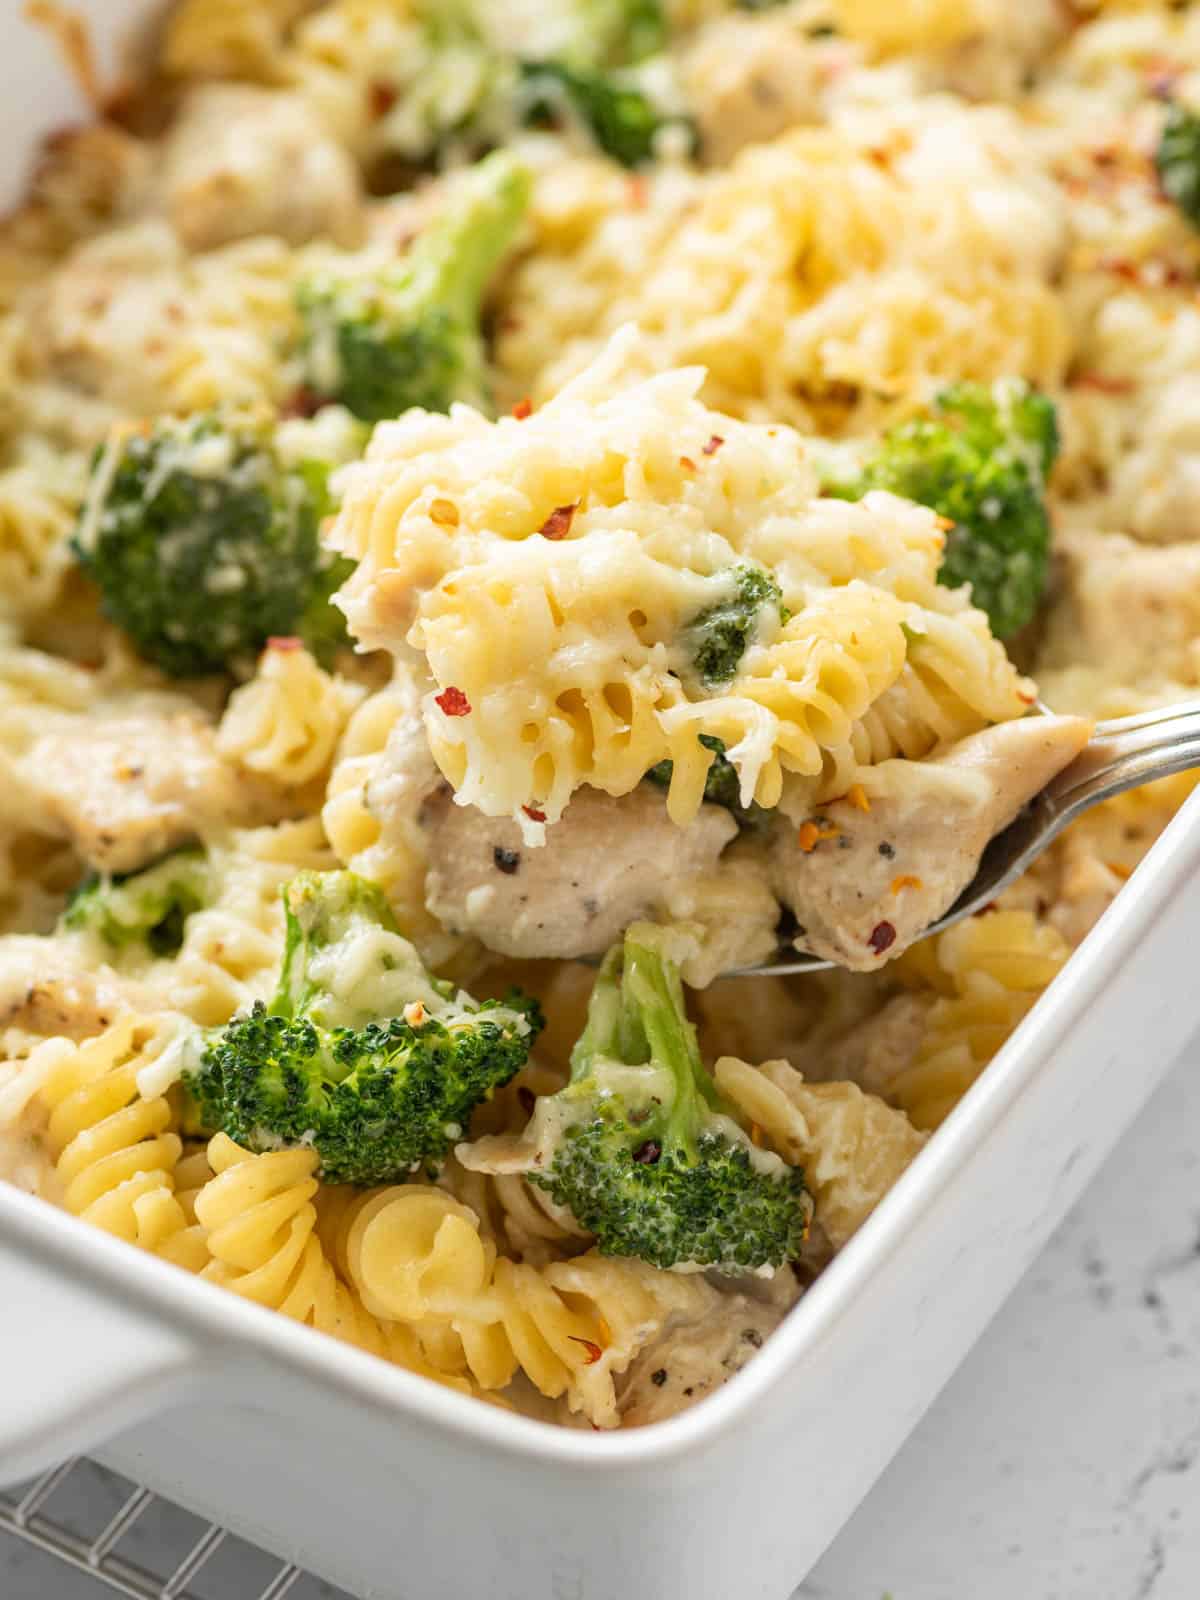 a spoon scooping up some chicken broccoli and pasta bake